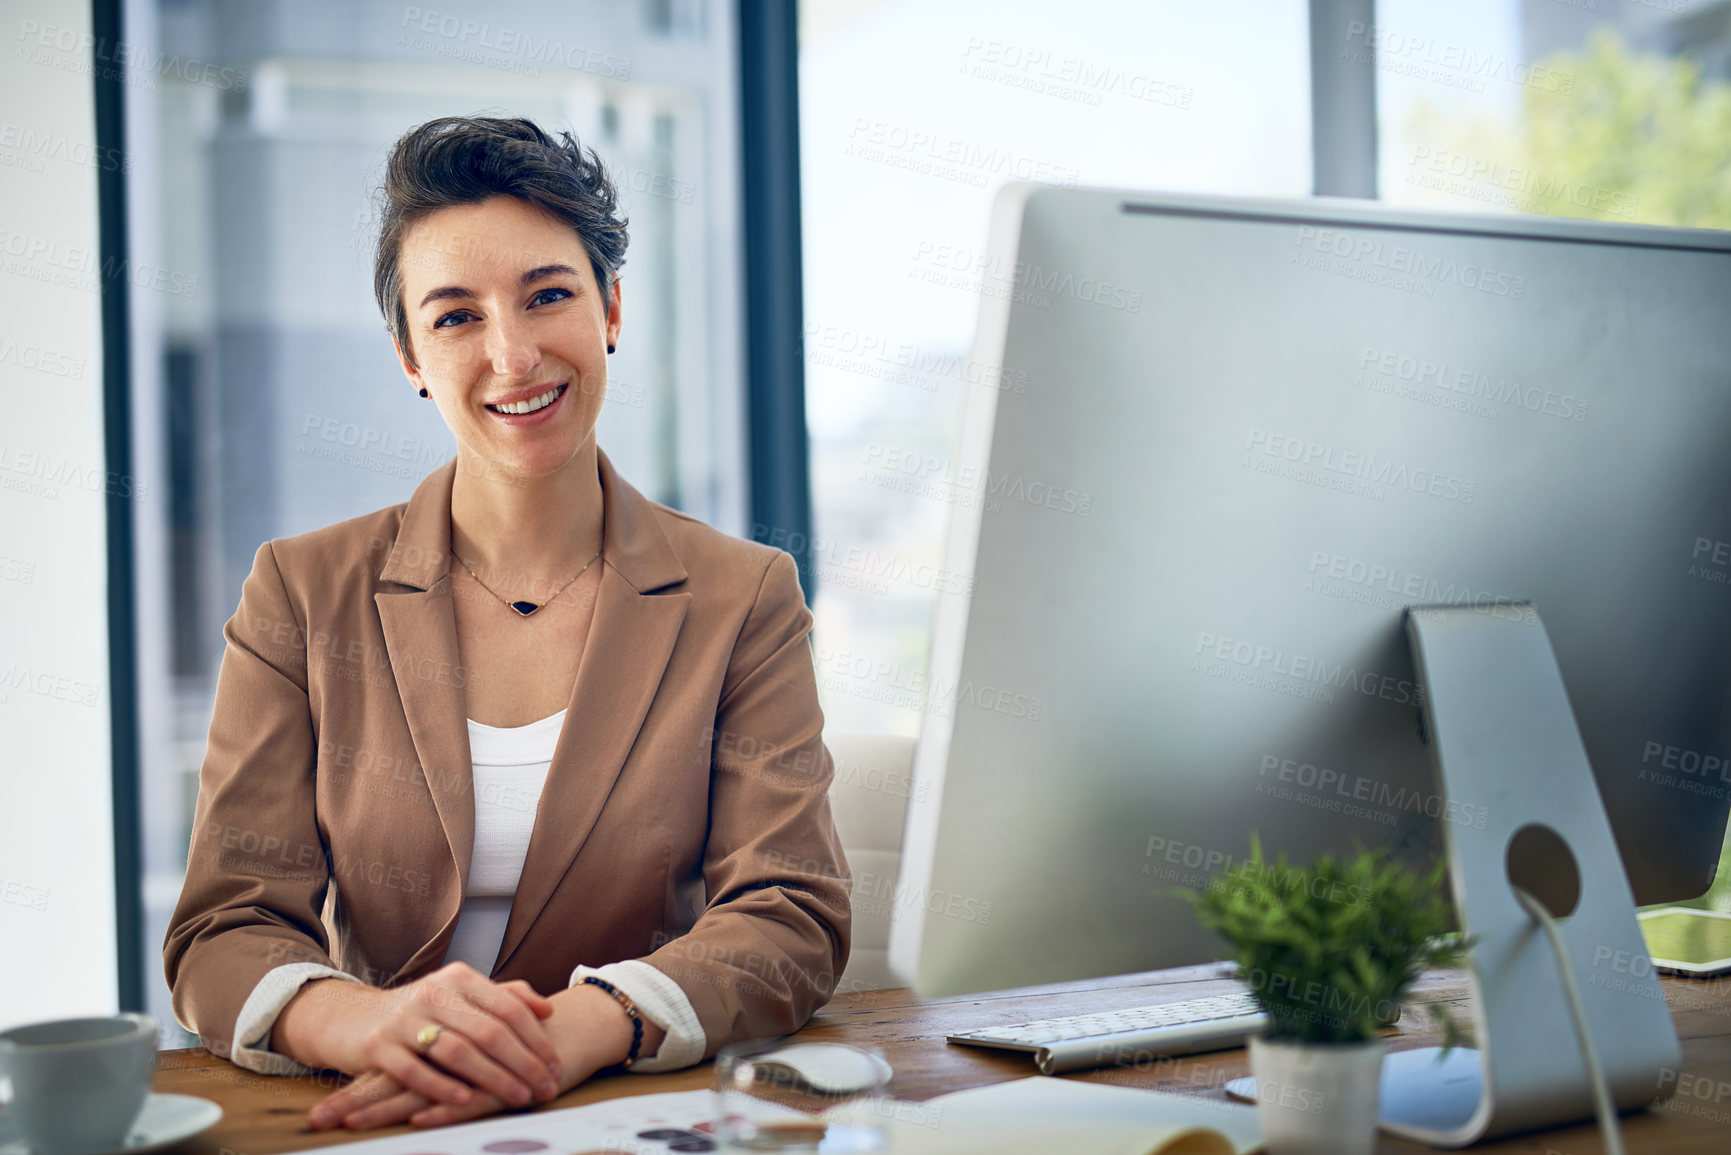 Buy stock photo Portrait of a businesswoman working at her desk in an office